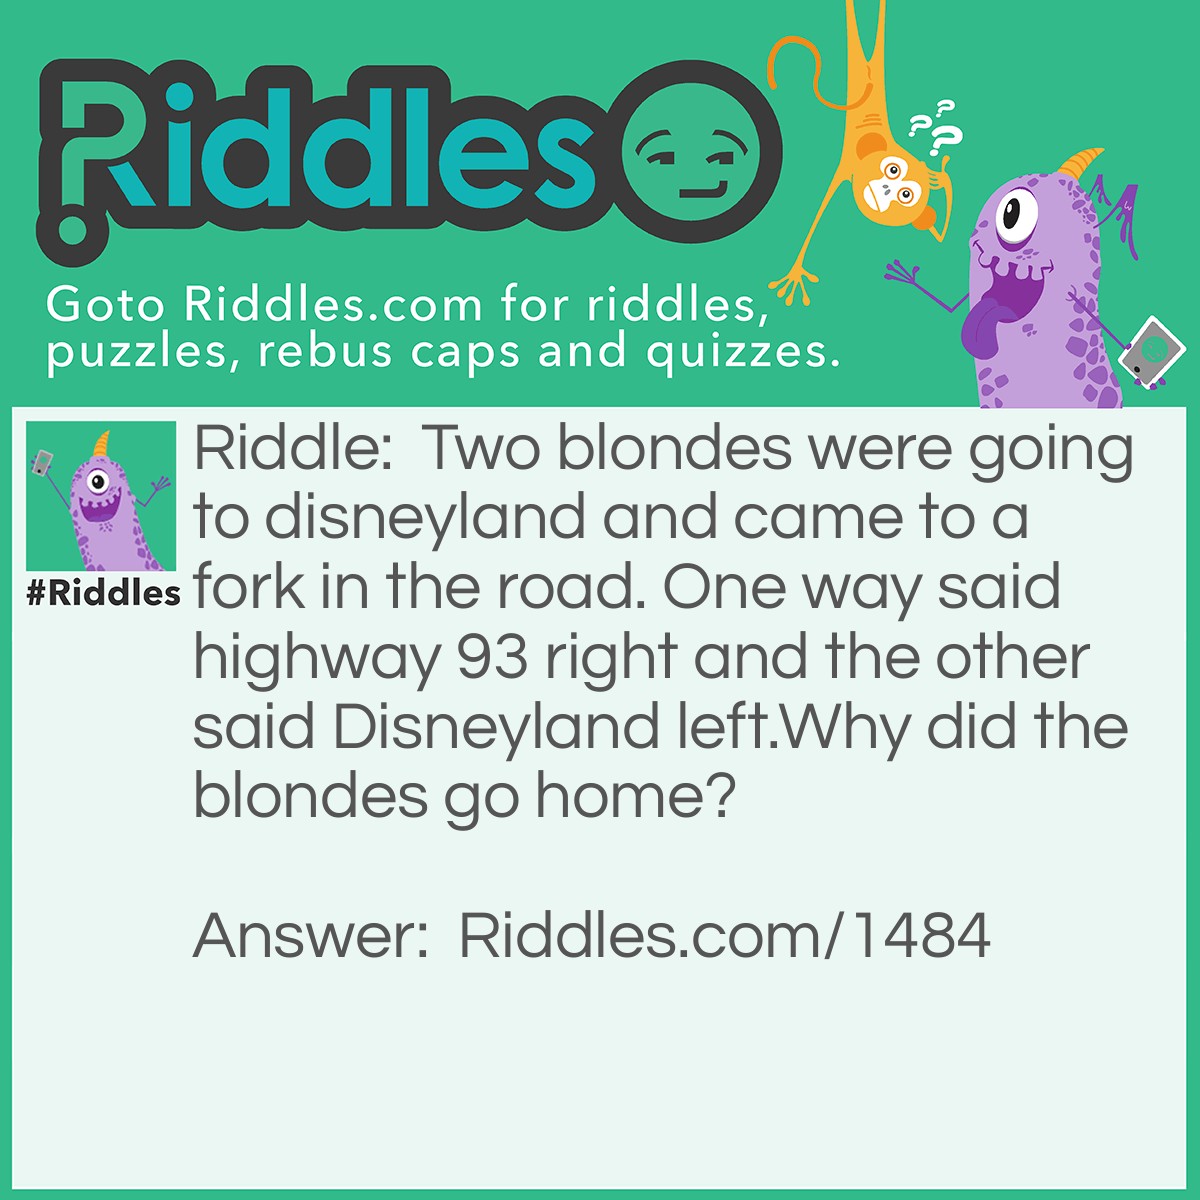 Riddle: Two blondes were going to Disneyland and came to a fork in the road. One way said Highway 93 right and the other said Disneyland left.
Why did the blondes go home? Answer: Because they thought that Disneyland actually left.